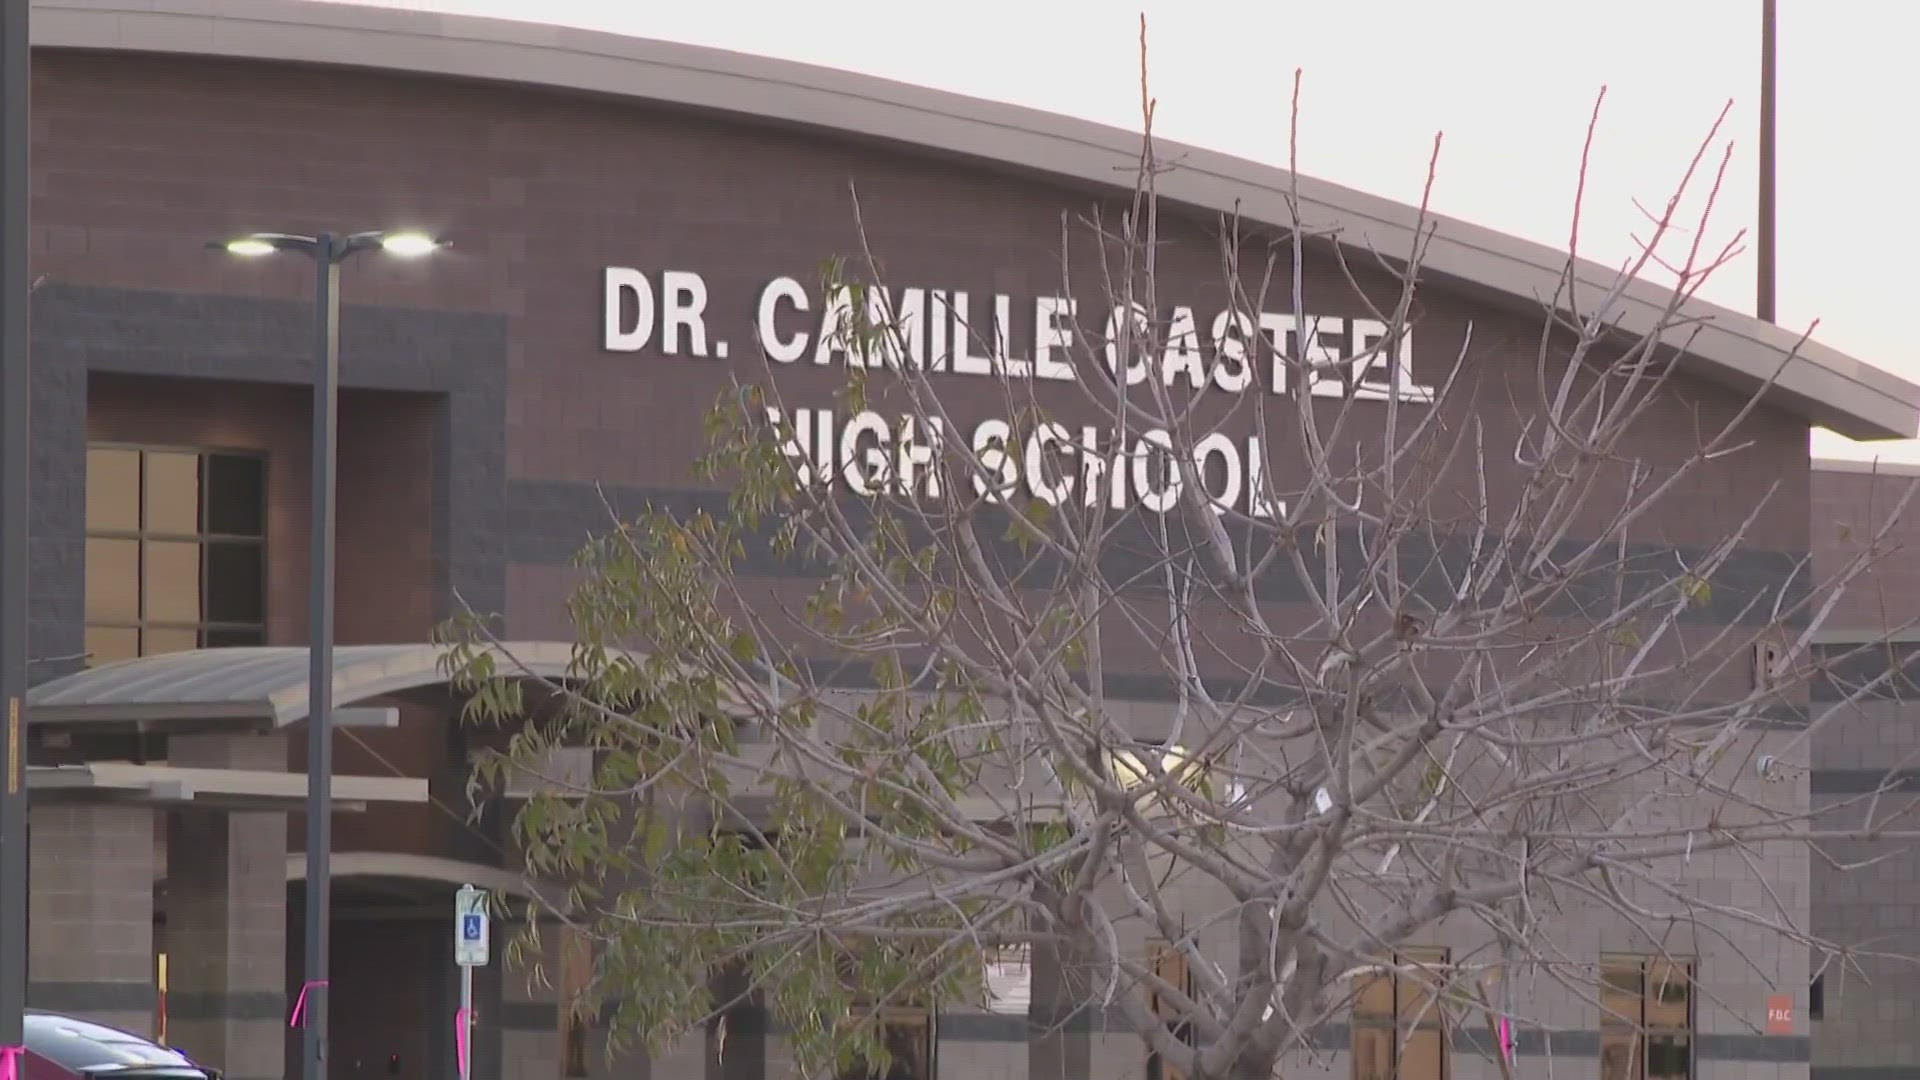 The parents of one of the students involved accuses administrators of failing to properly report the allegations to police.